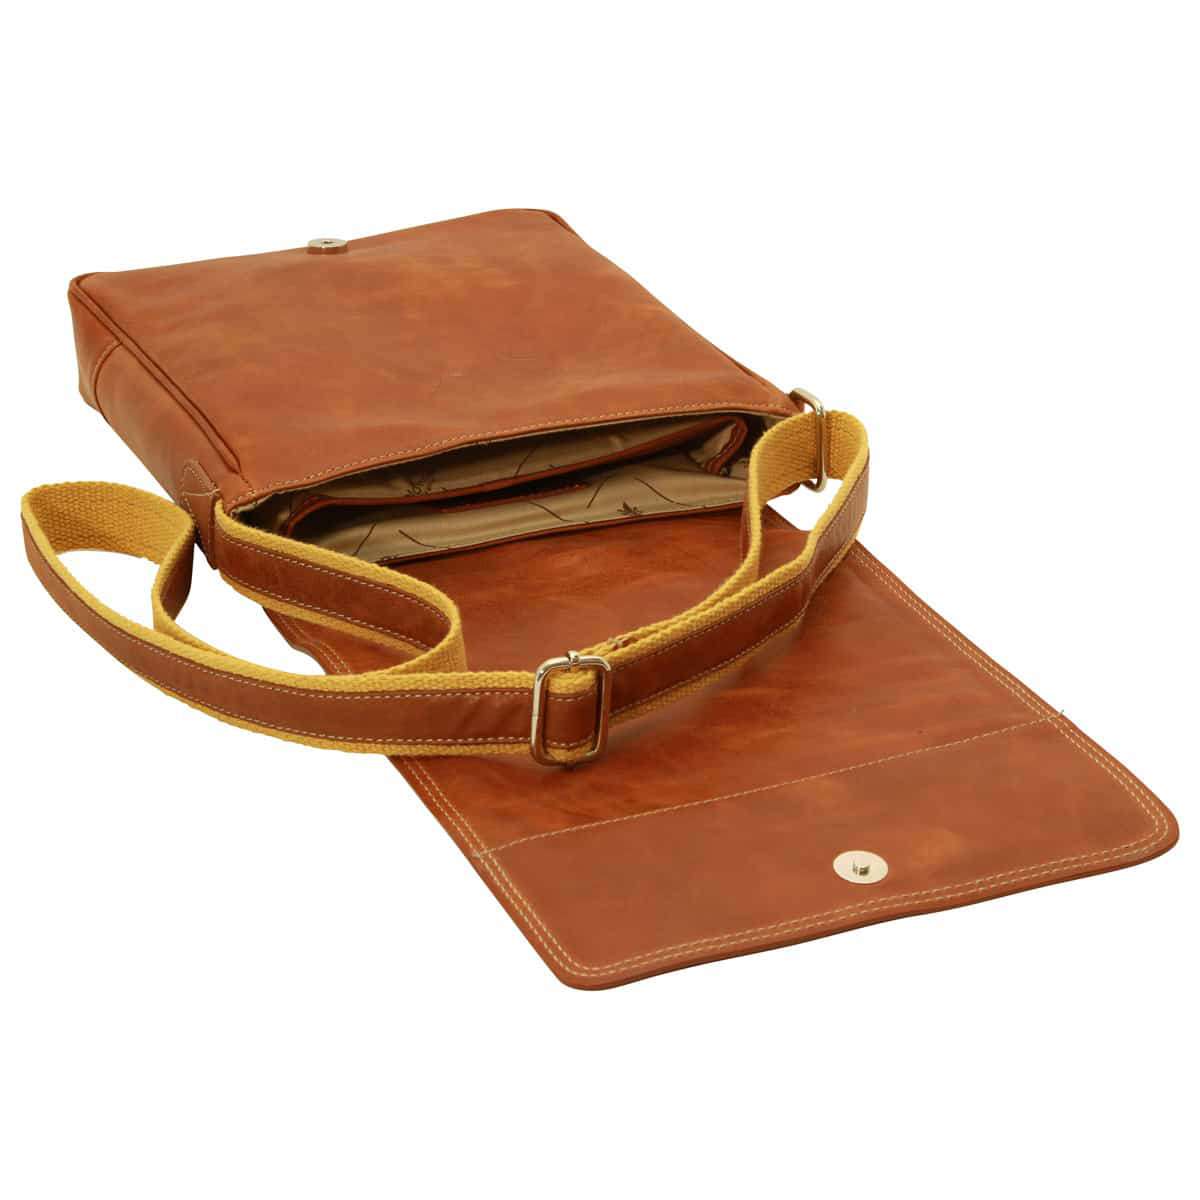 Leather I-Pad bag - Brown Colonial | 087361CO | EURO | Old Angler Firenze